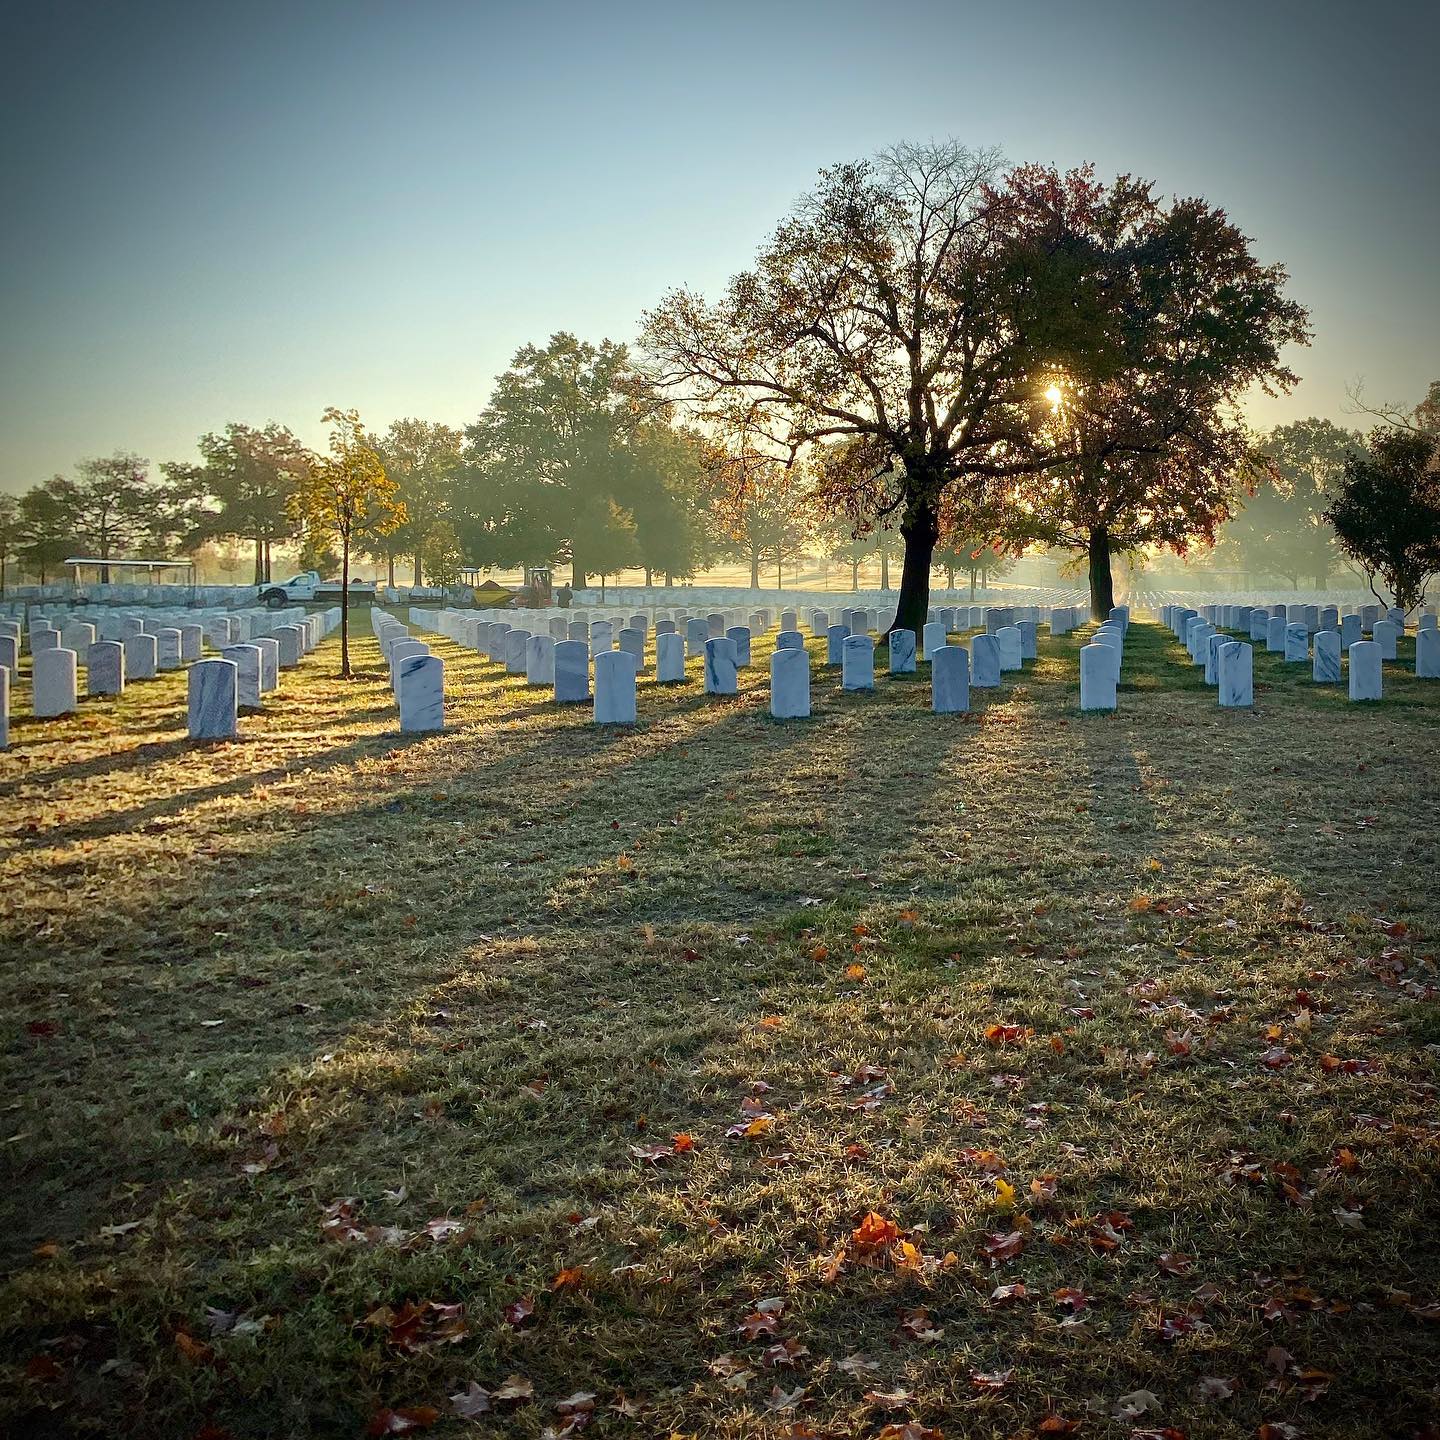 Early morning fog burning off in section 55. Arlington Media is covering six services at Arlington today. 
#Arlington⠀
#ArlingtonMedia⠀
#ArlingtonCemetery⠀
#ArlingtonNationalCemetery⠀